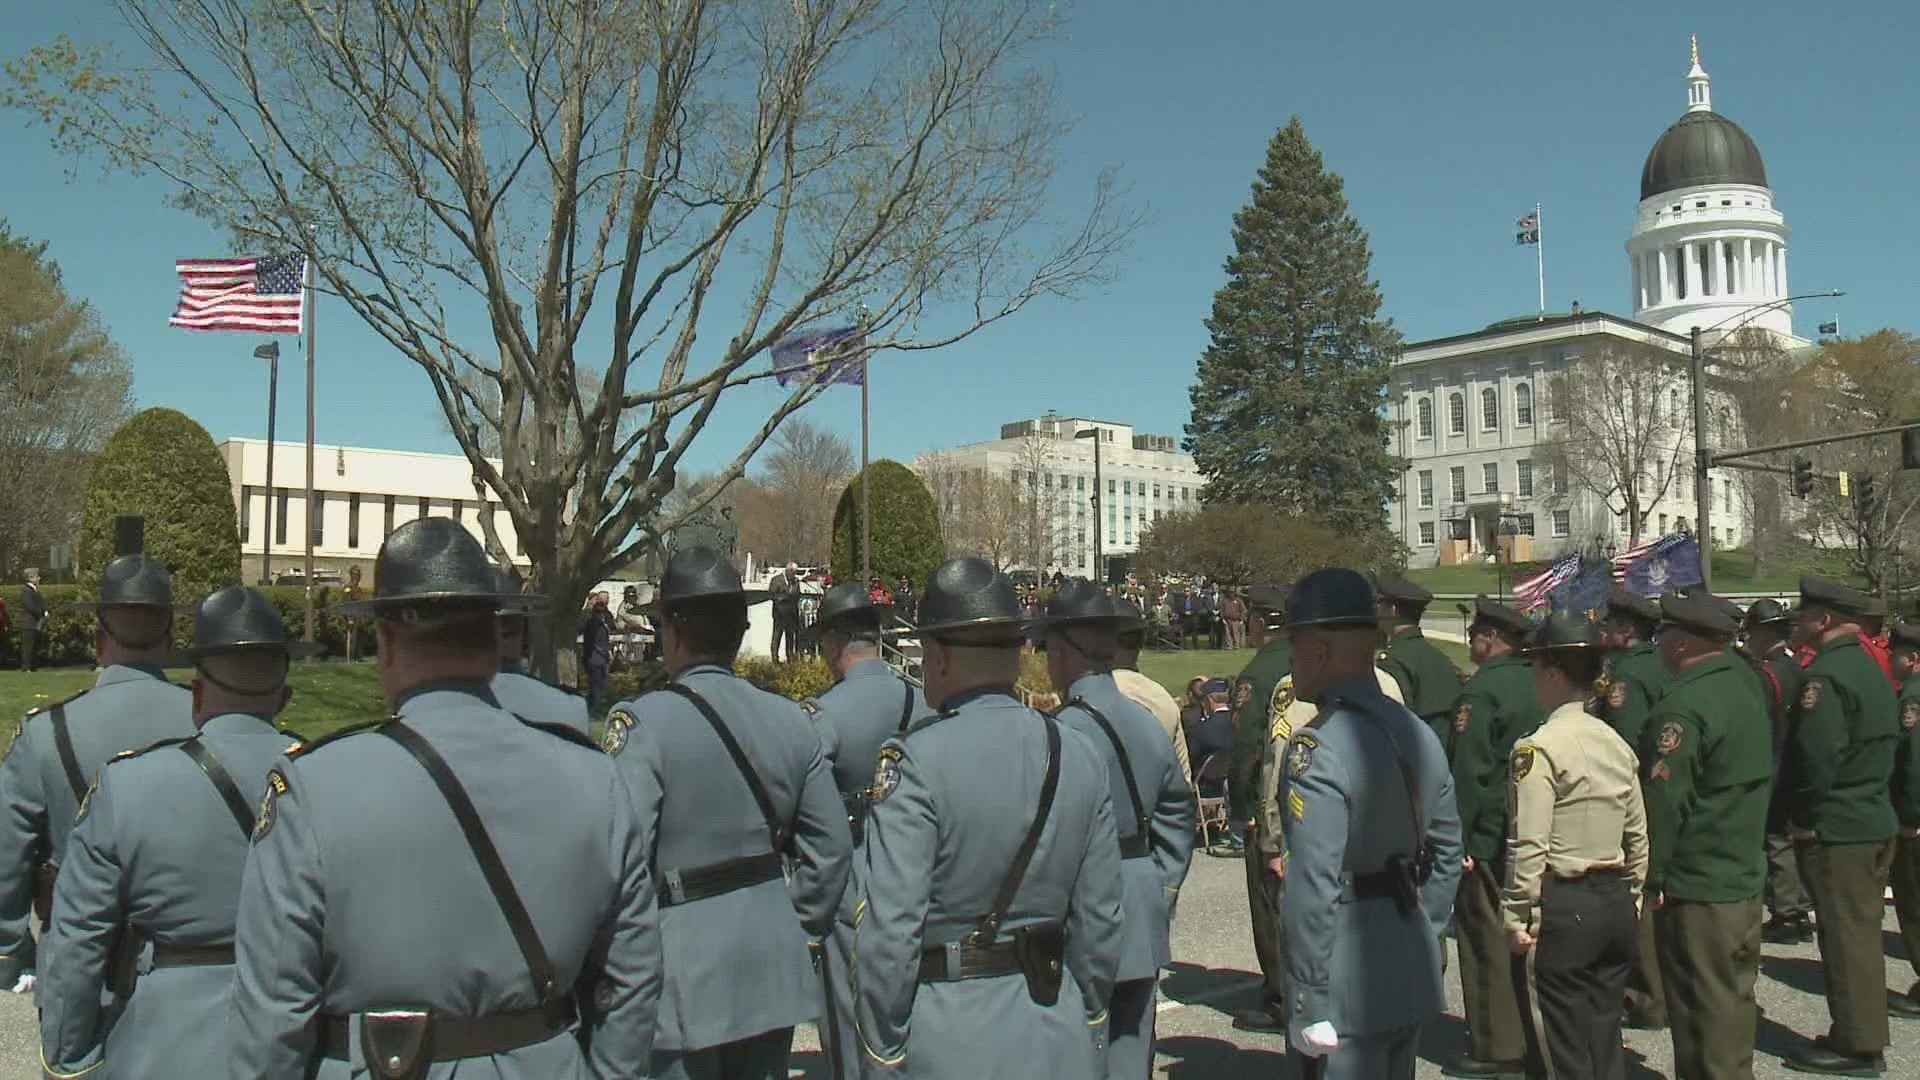 The street in front of the memorial was shut down for the ceremony, as columns of officers marched from Capitol Park.